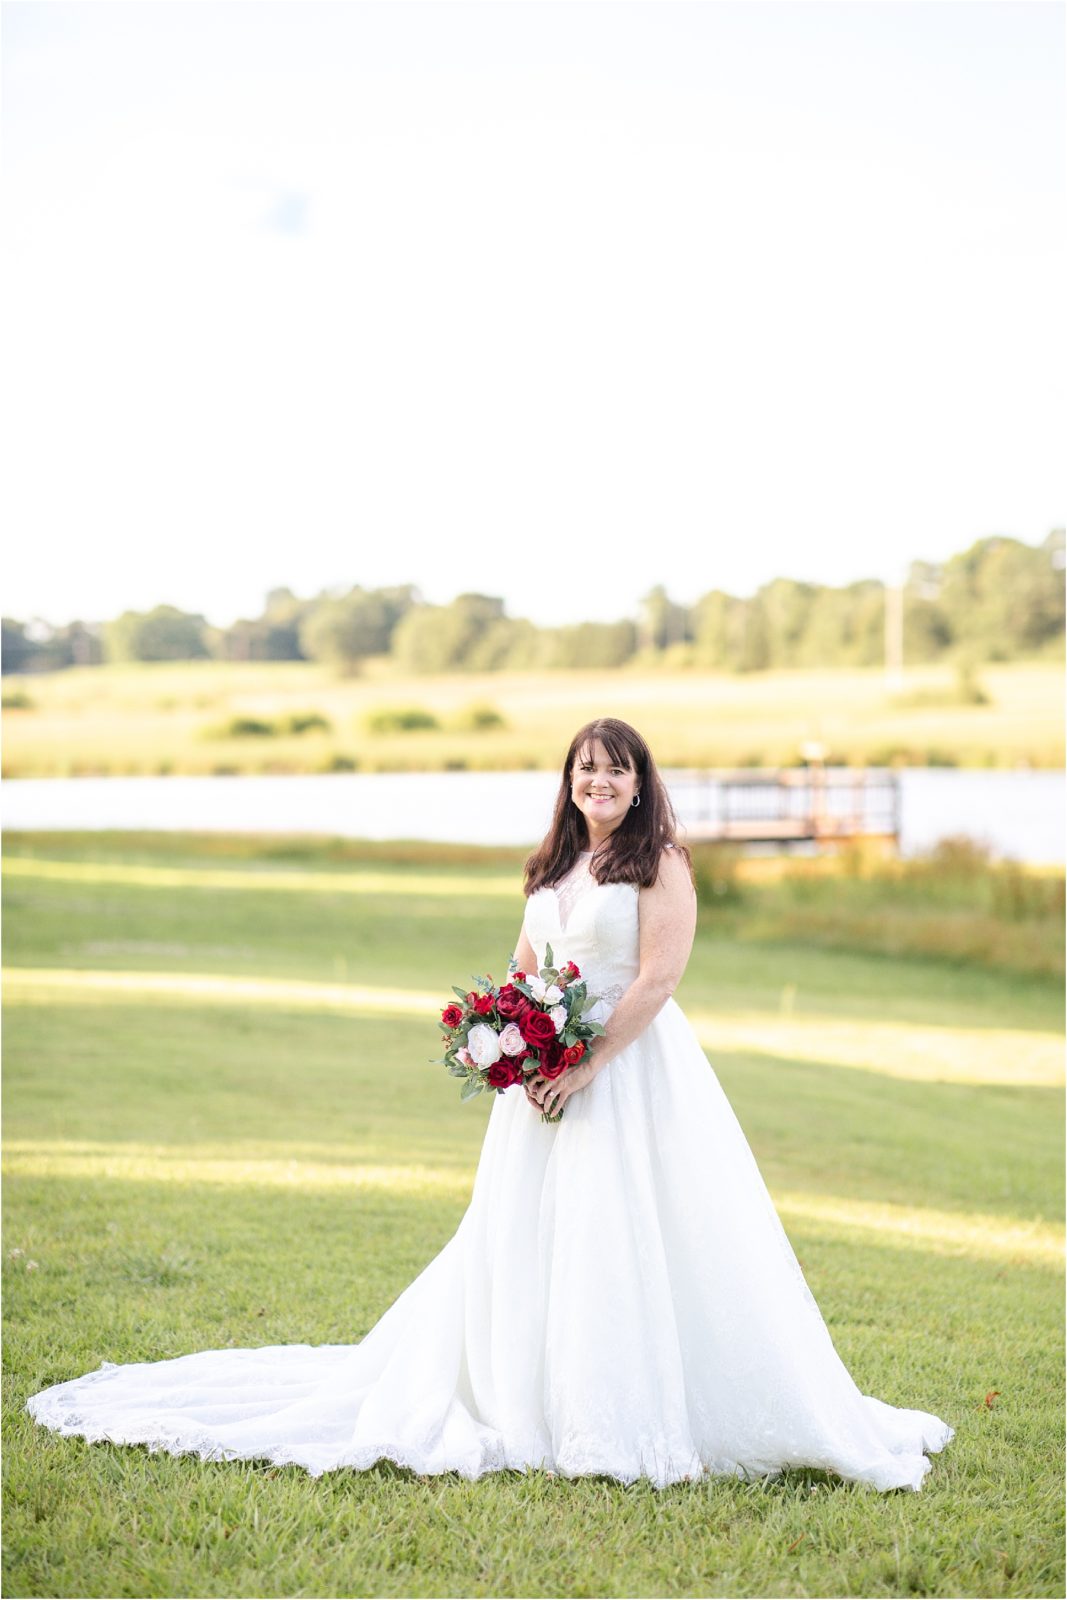 Bride in wedding dress holding red flowers